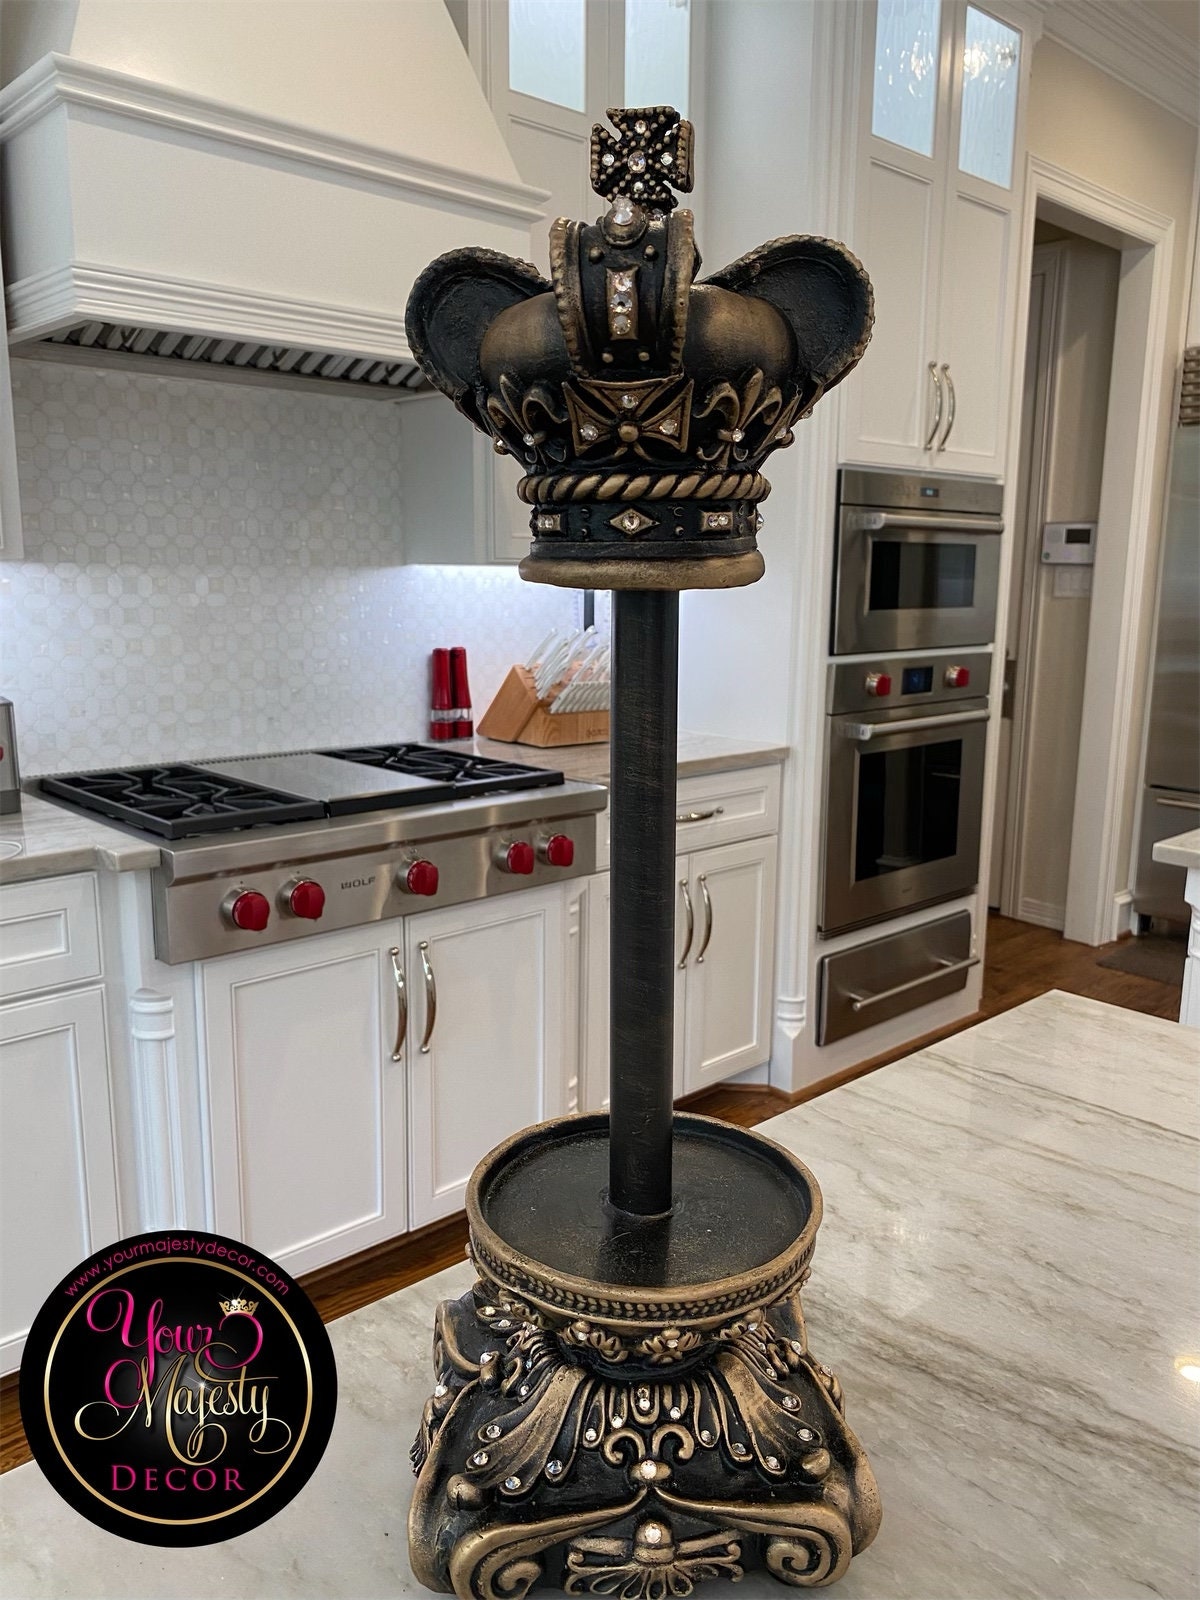 Decorative Paper Towel Holder with Crown